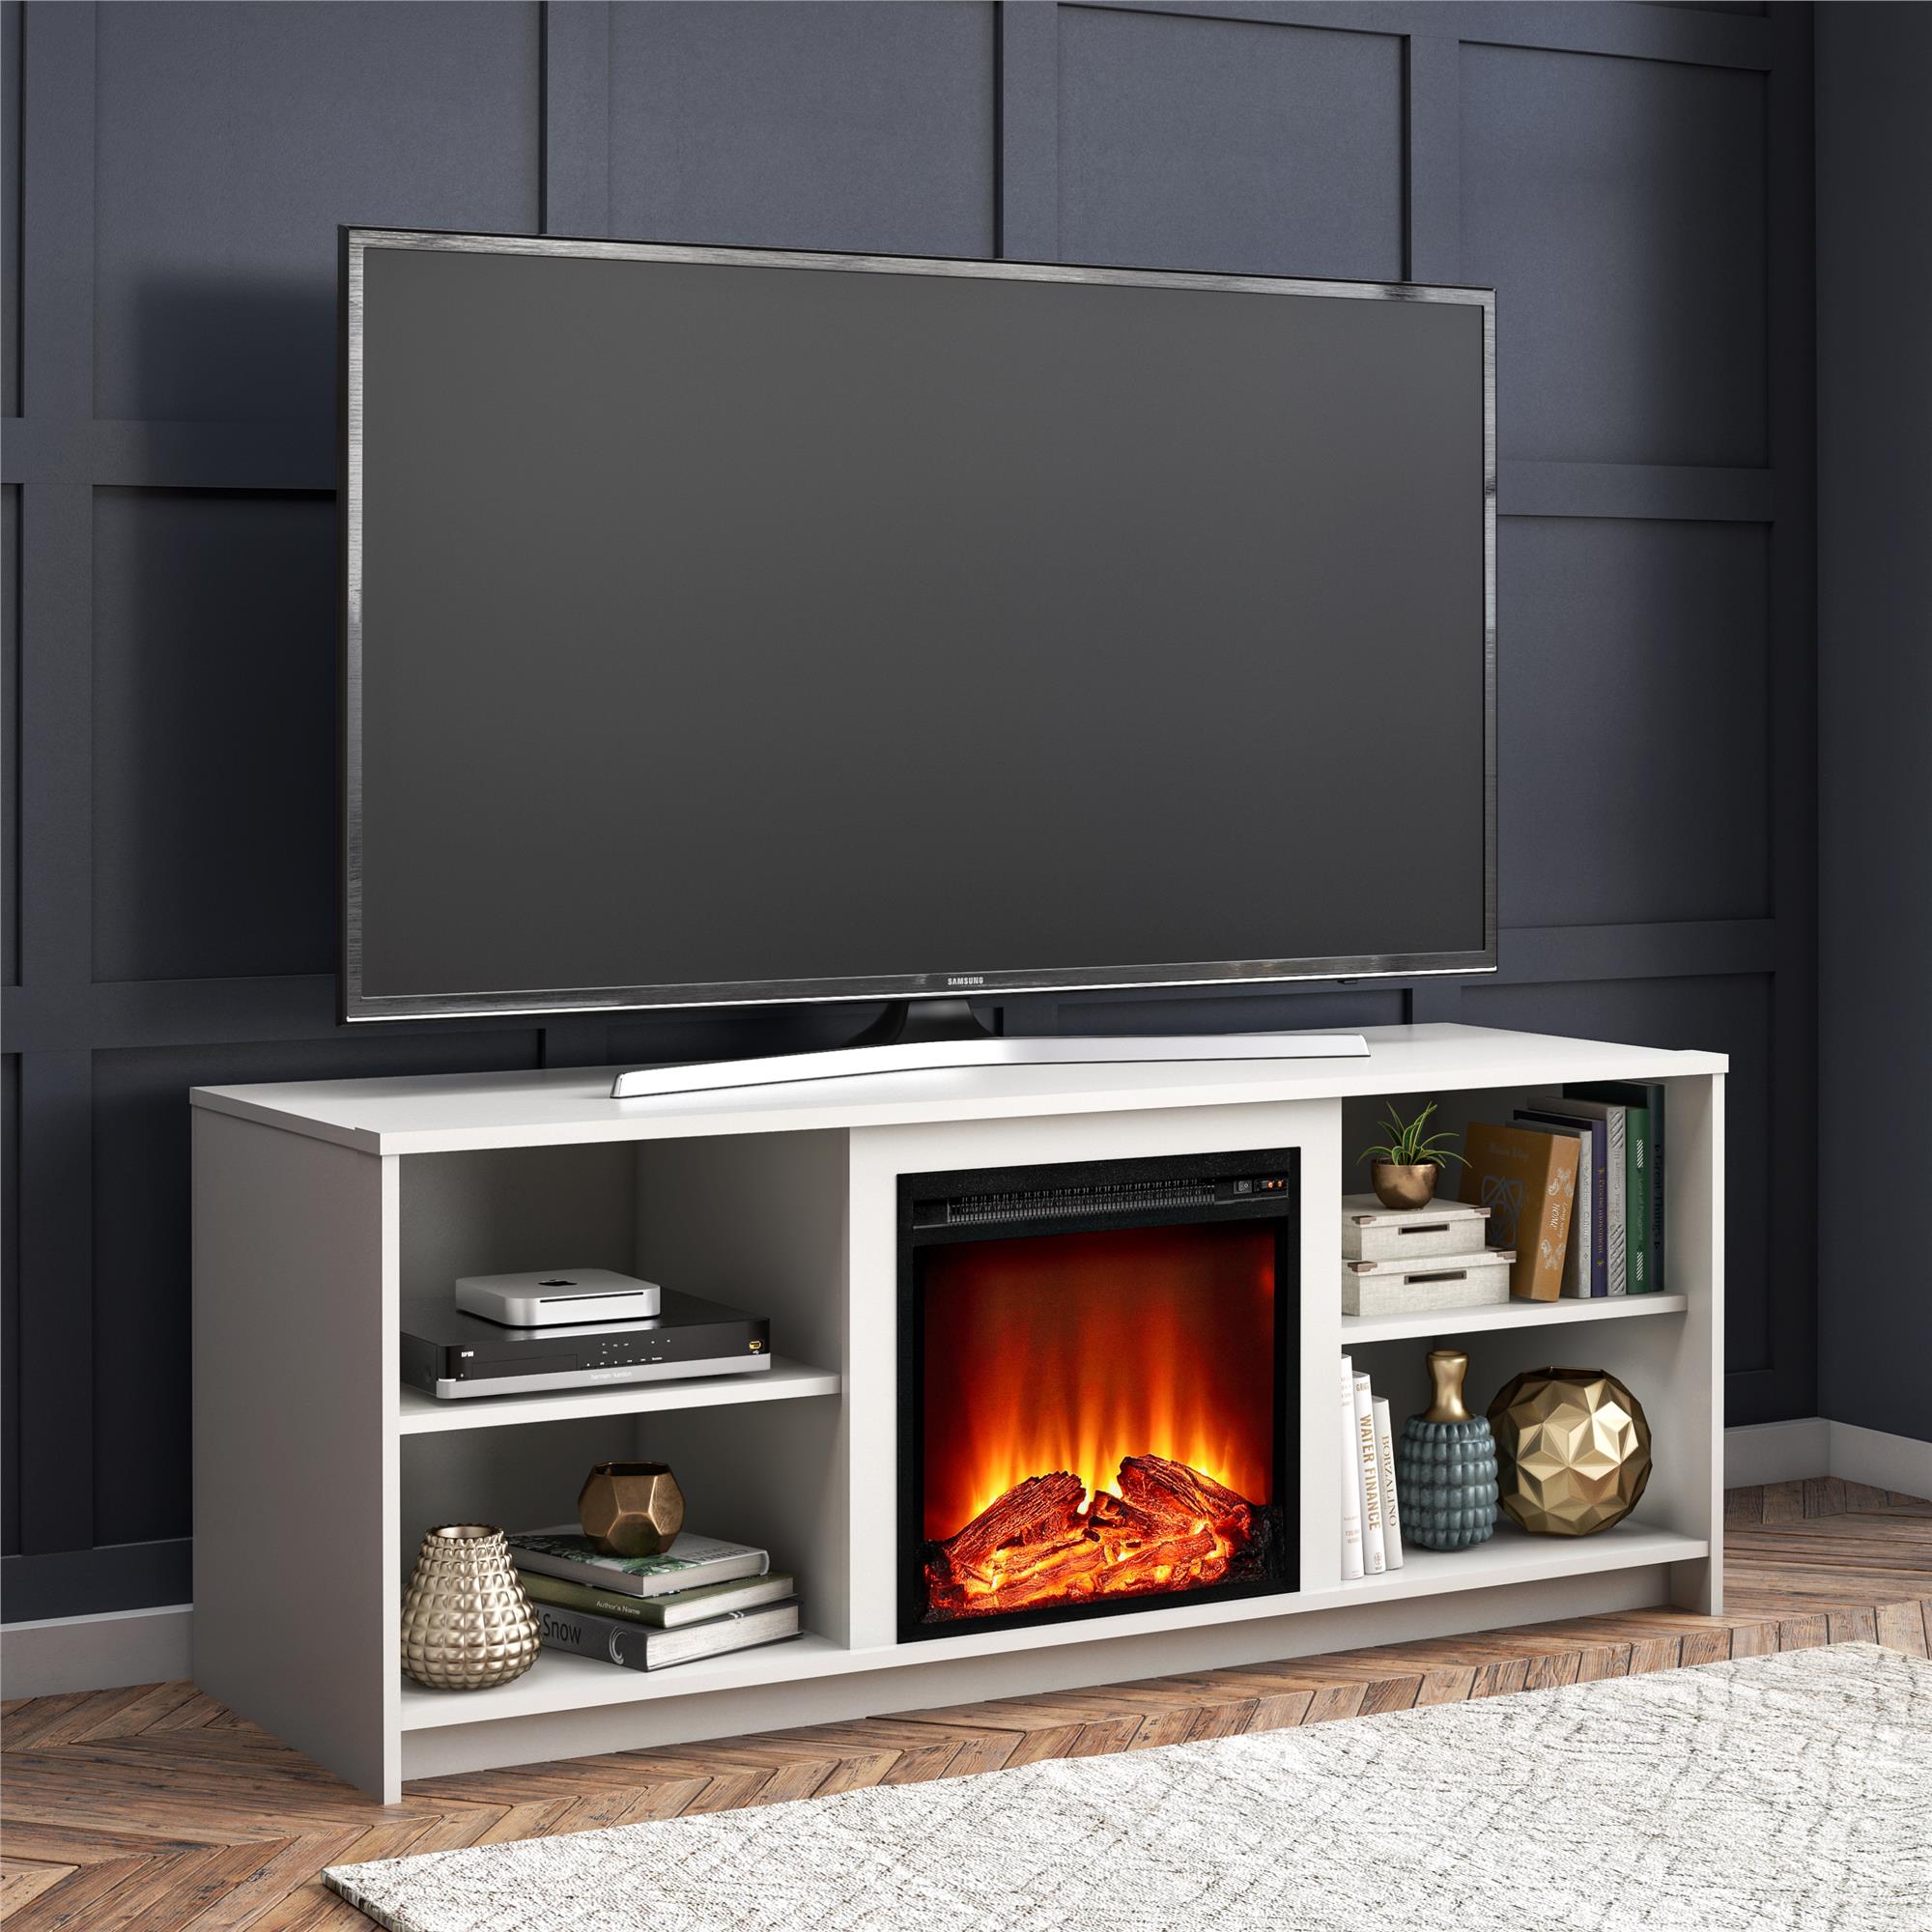 Mainstays Fireplace TV Stand for TVs up to 65", White - image 2 of 11